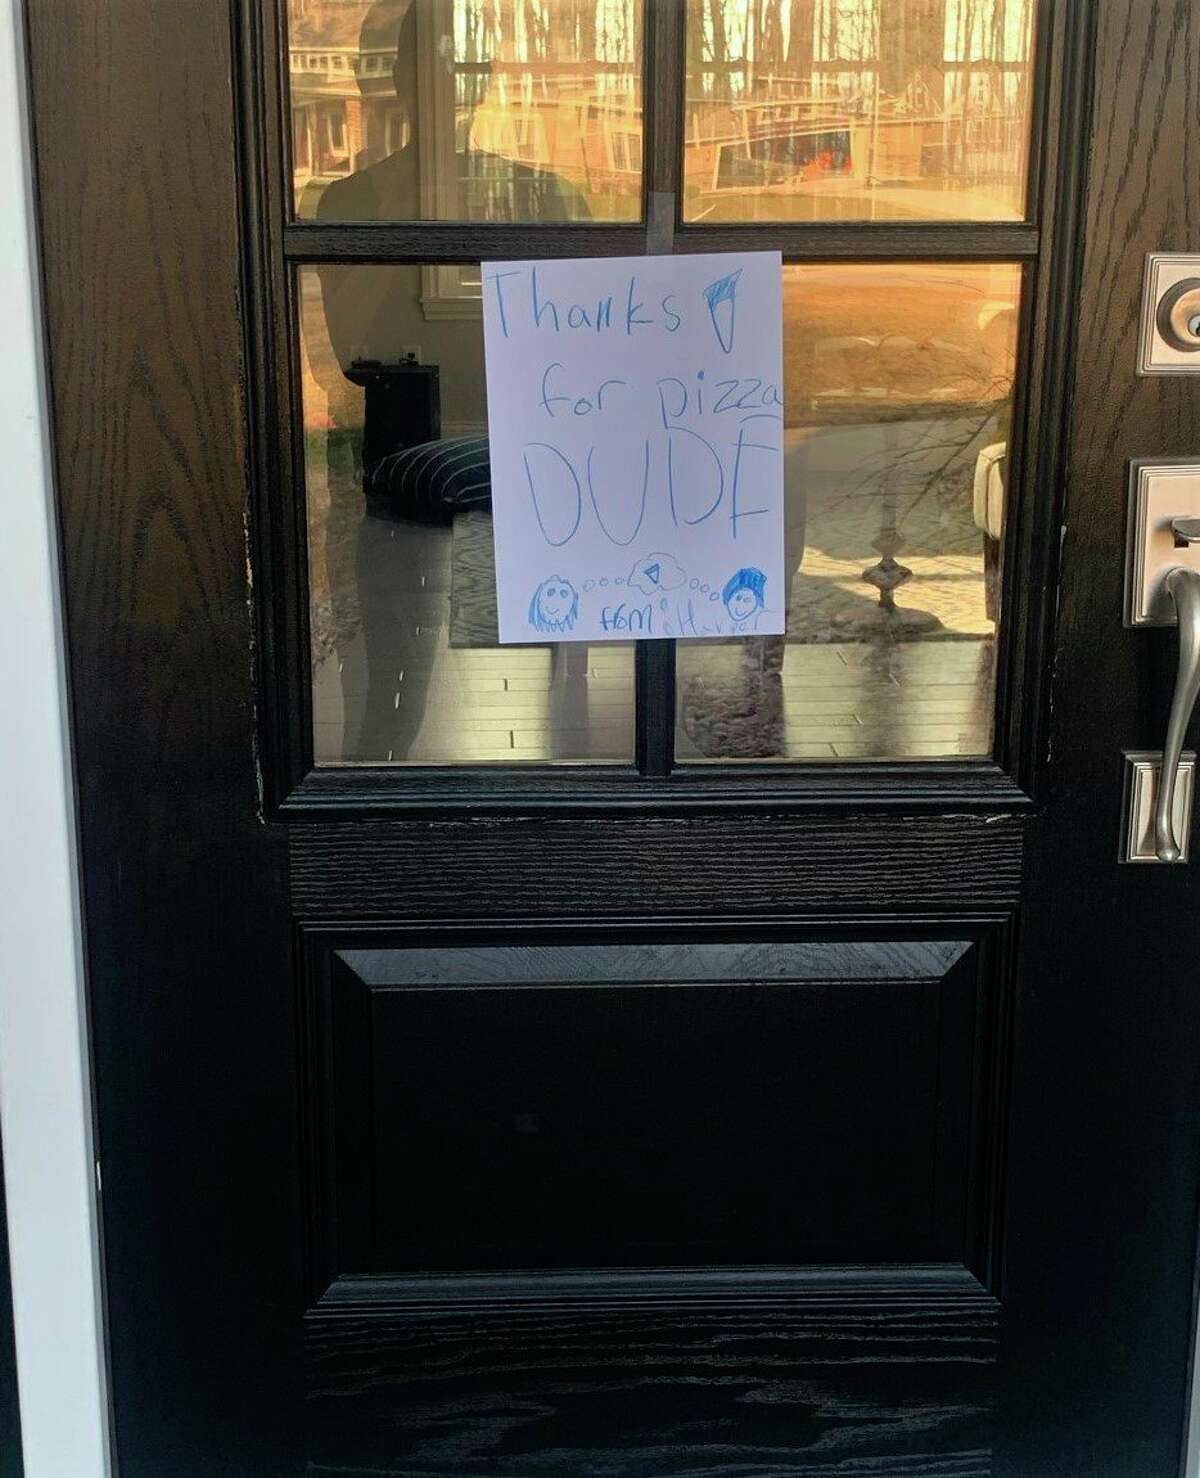 A note left on the door shows the kindness the Prokops have received running their Pizza Dude location in Midland. (Photo provided)